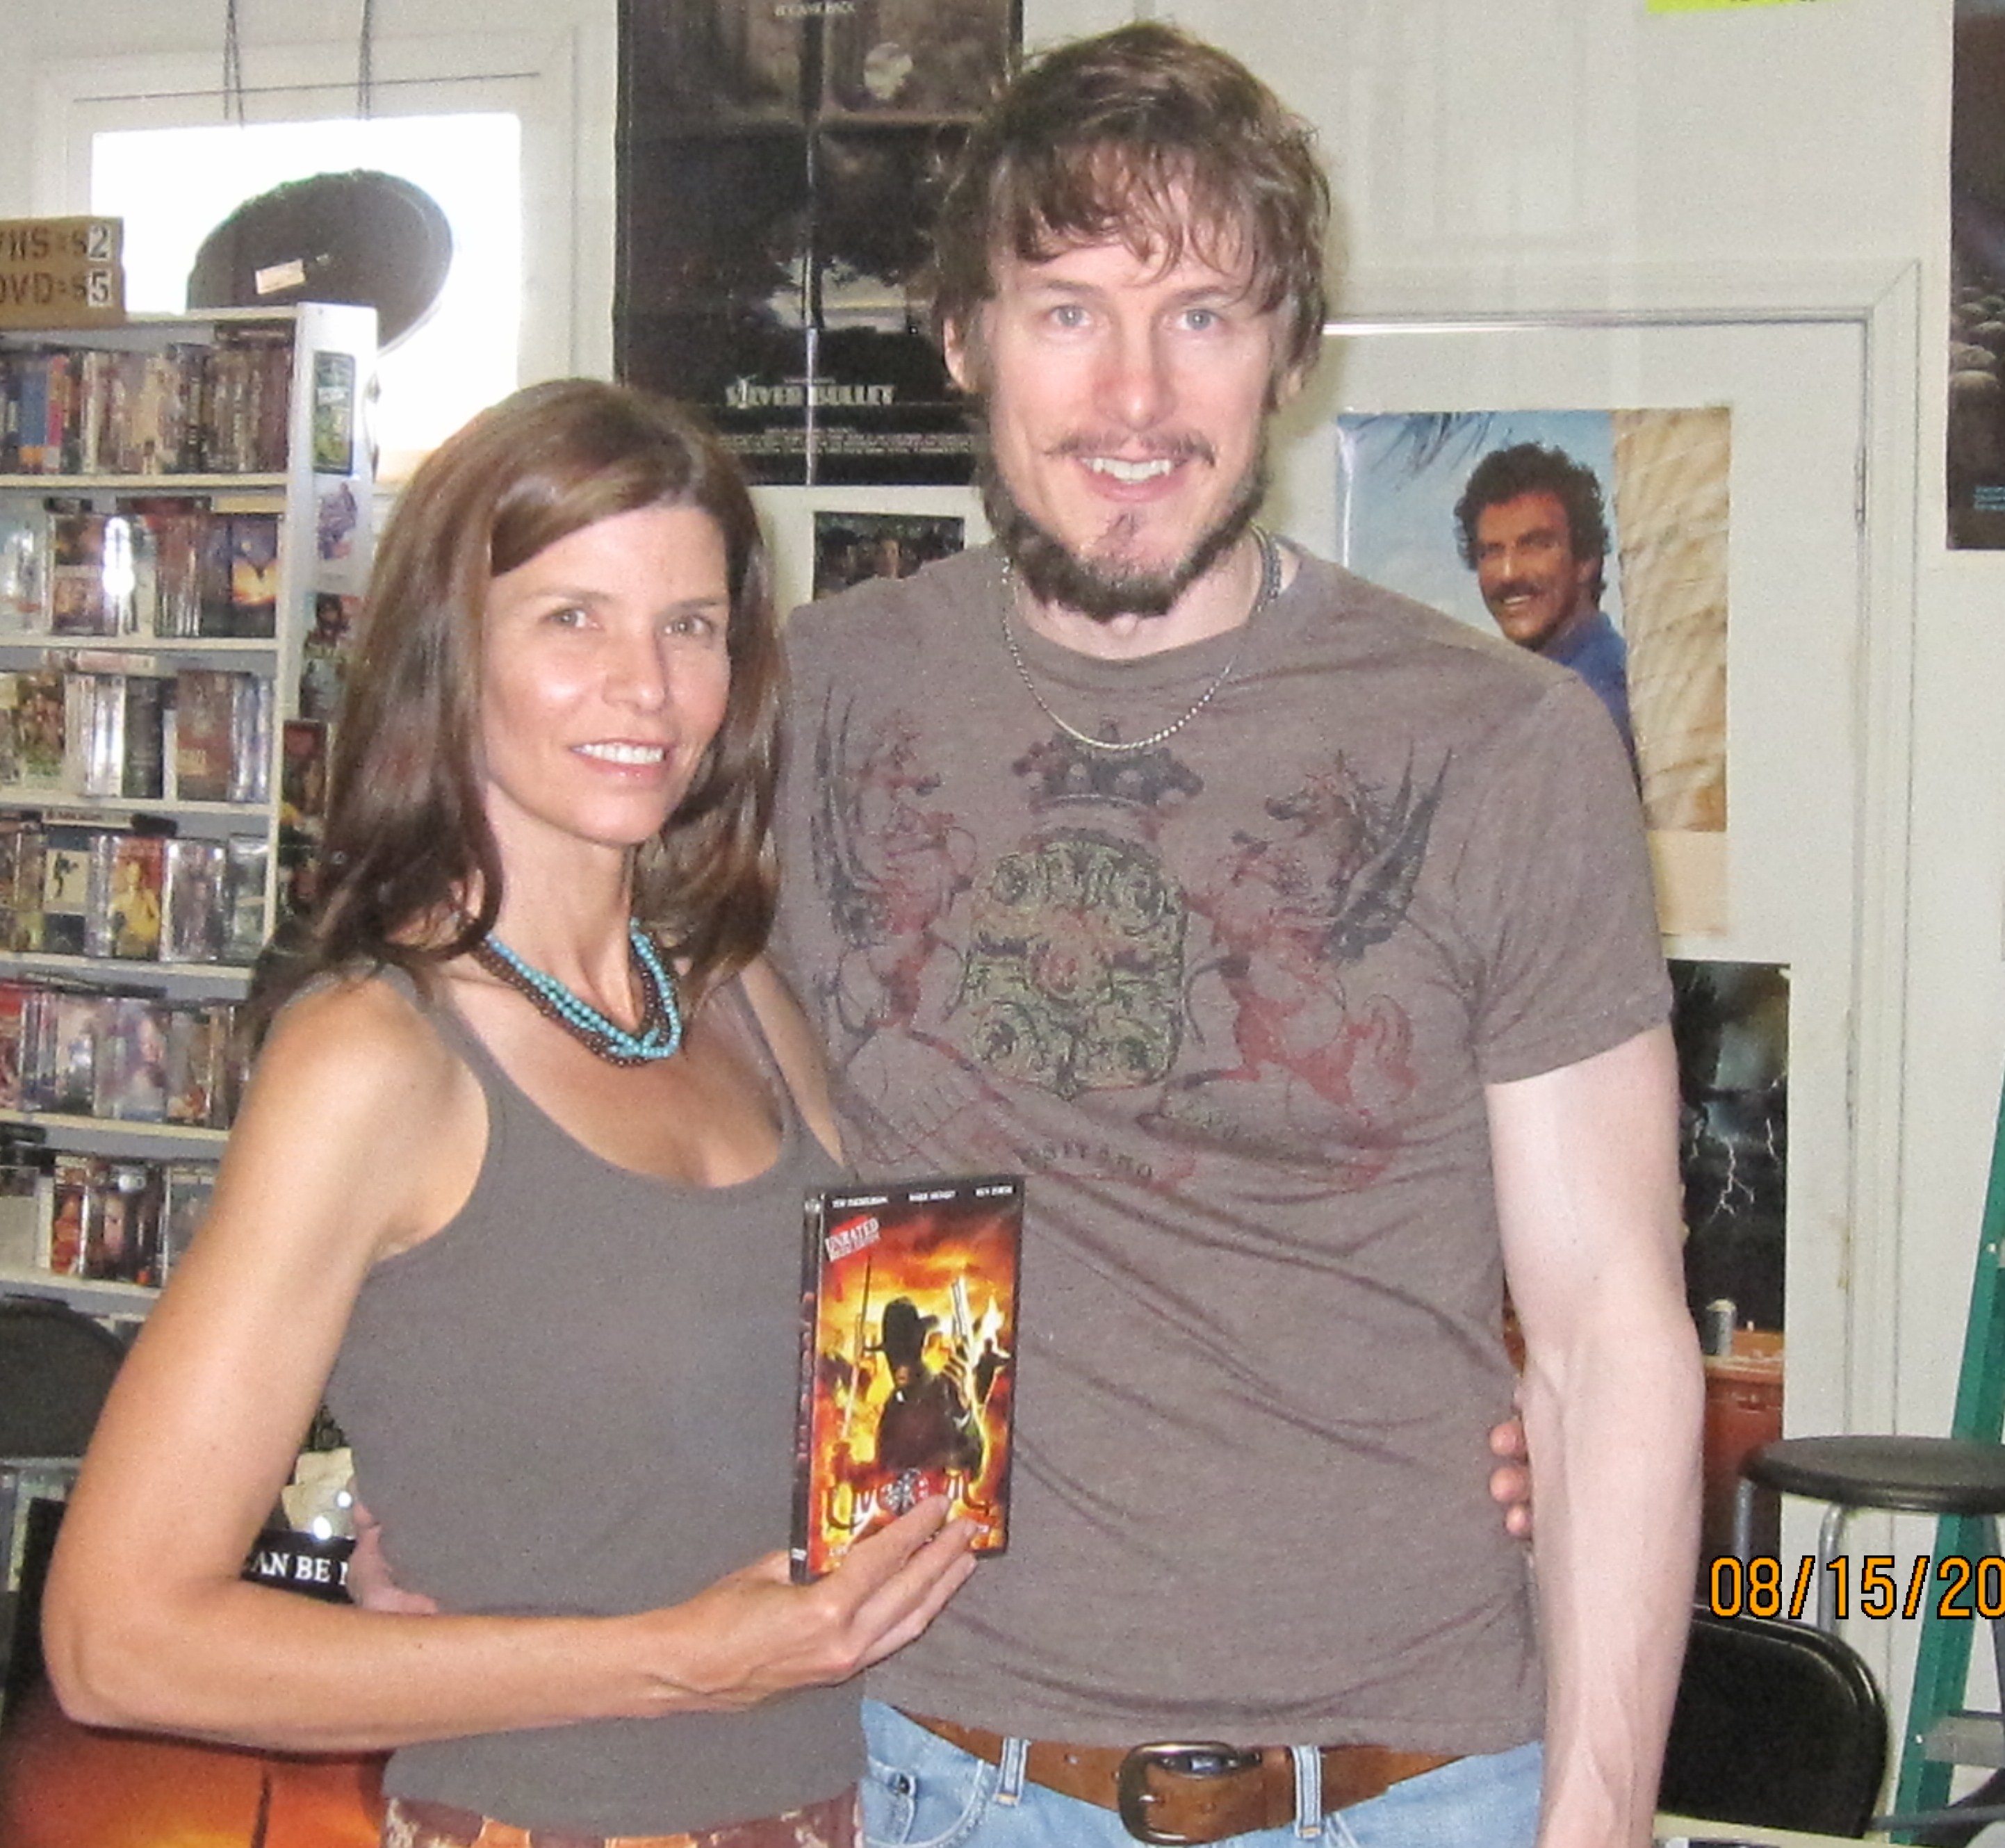 Cast members Gregory Lee Kenyon and Tammy Klein at DVD signing/promo at Spudic's Movie Emporium, August 15, 2010.